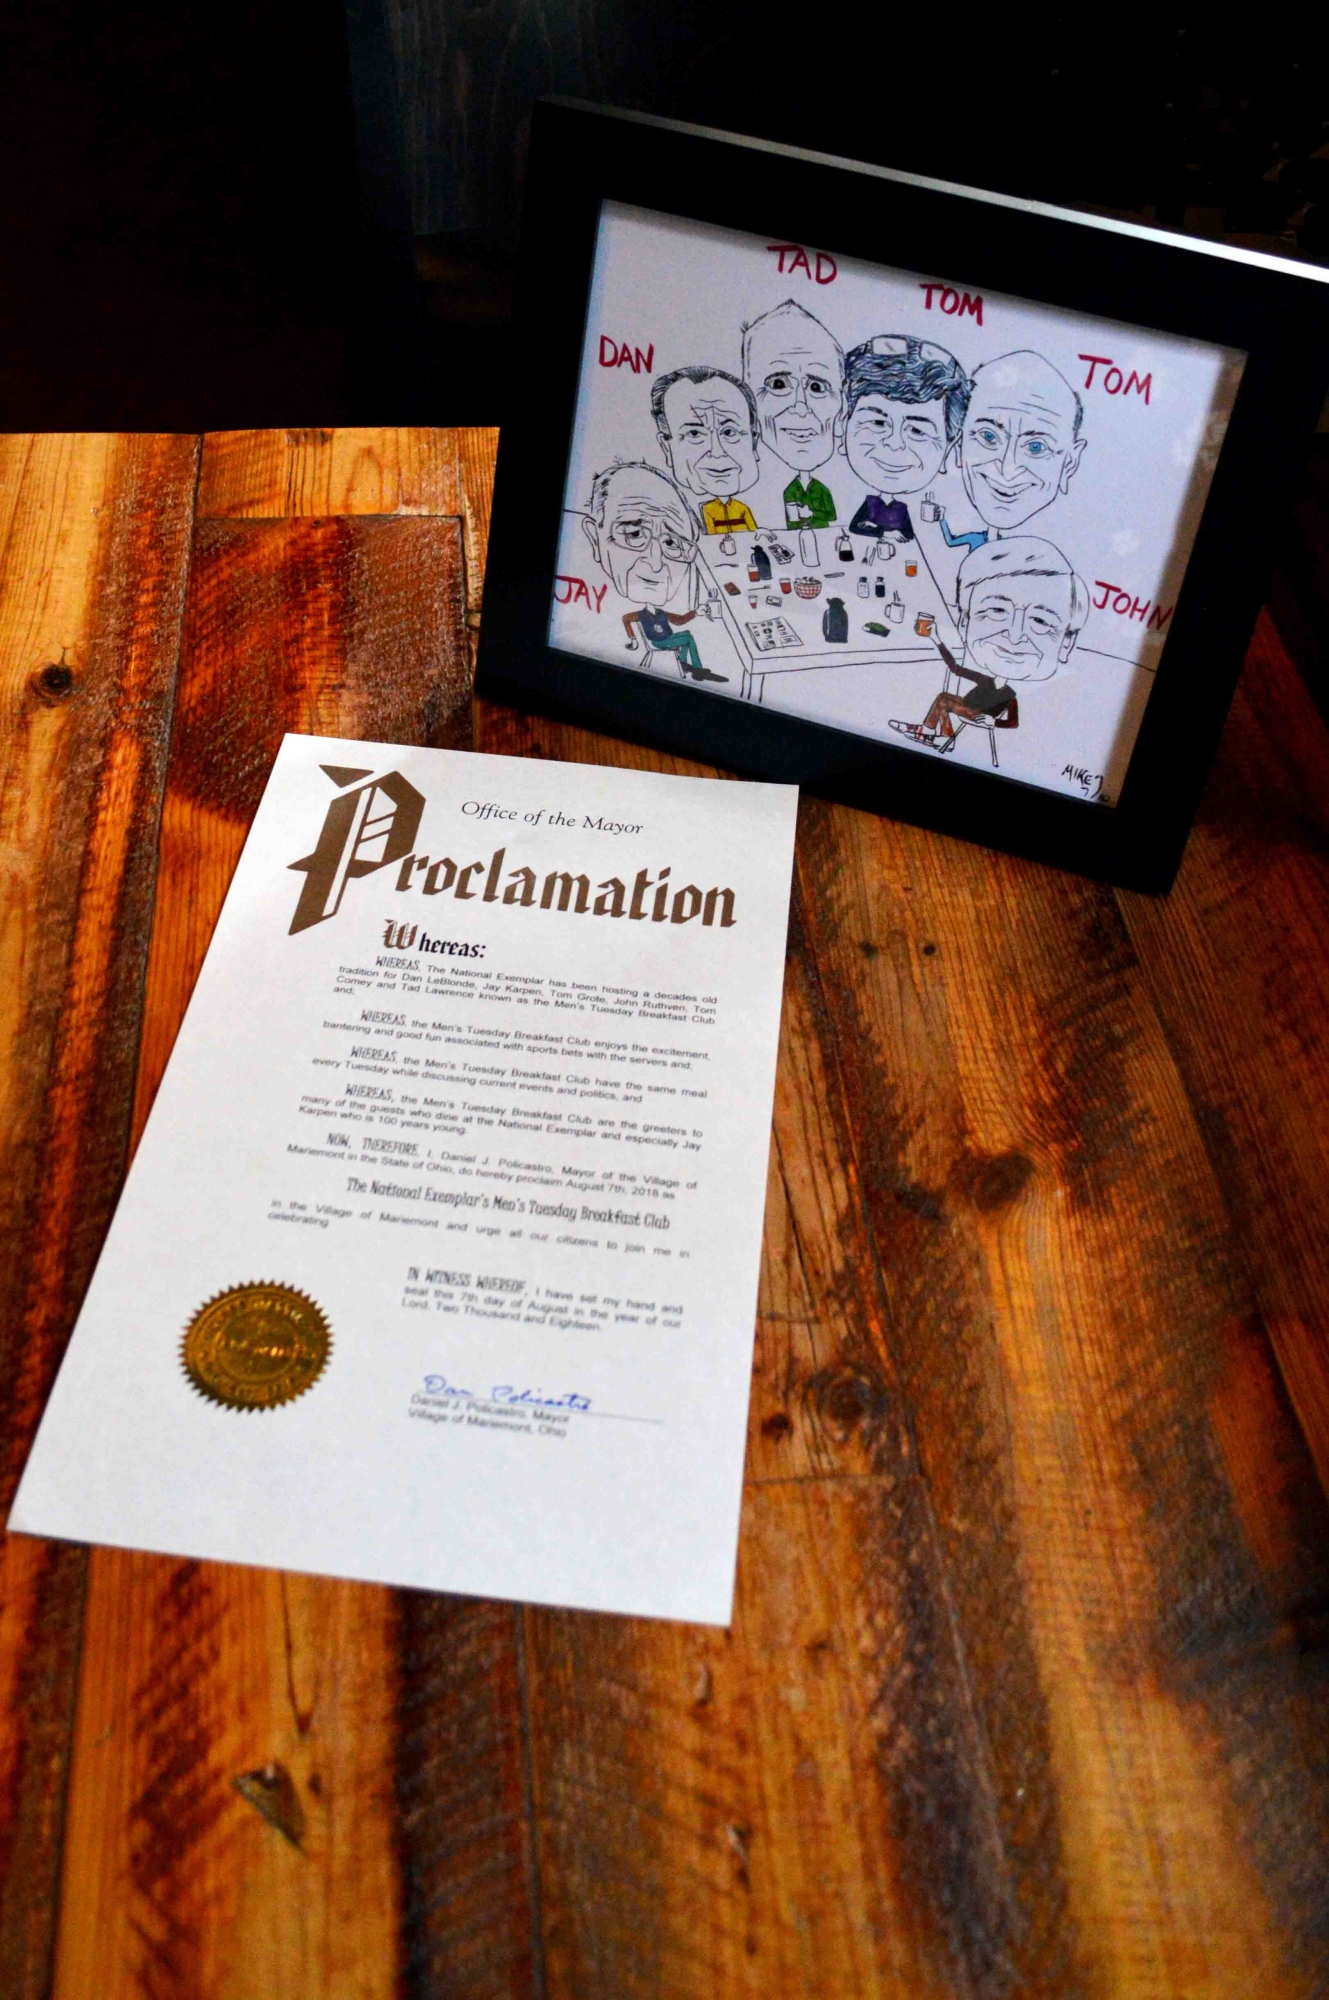 Every member of the group got to bring home his own caricature and proclamation.